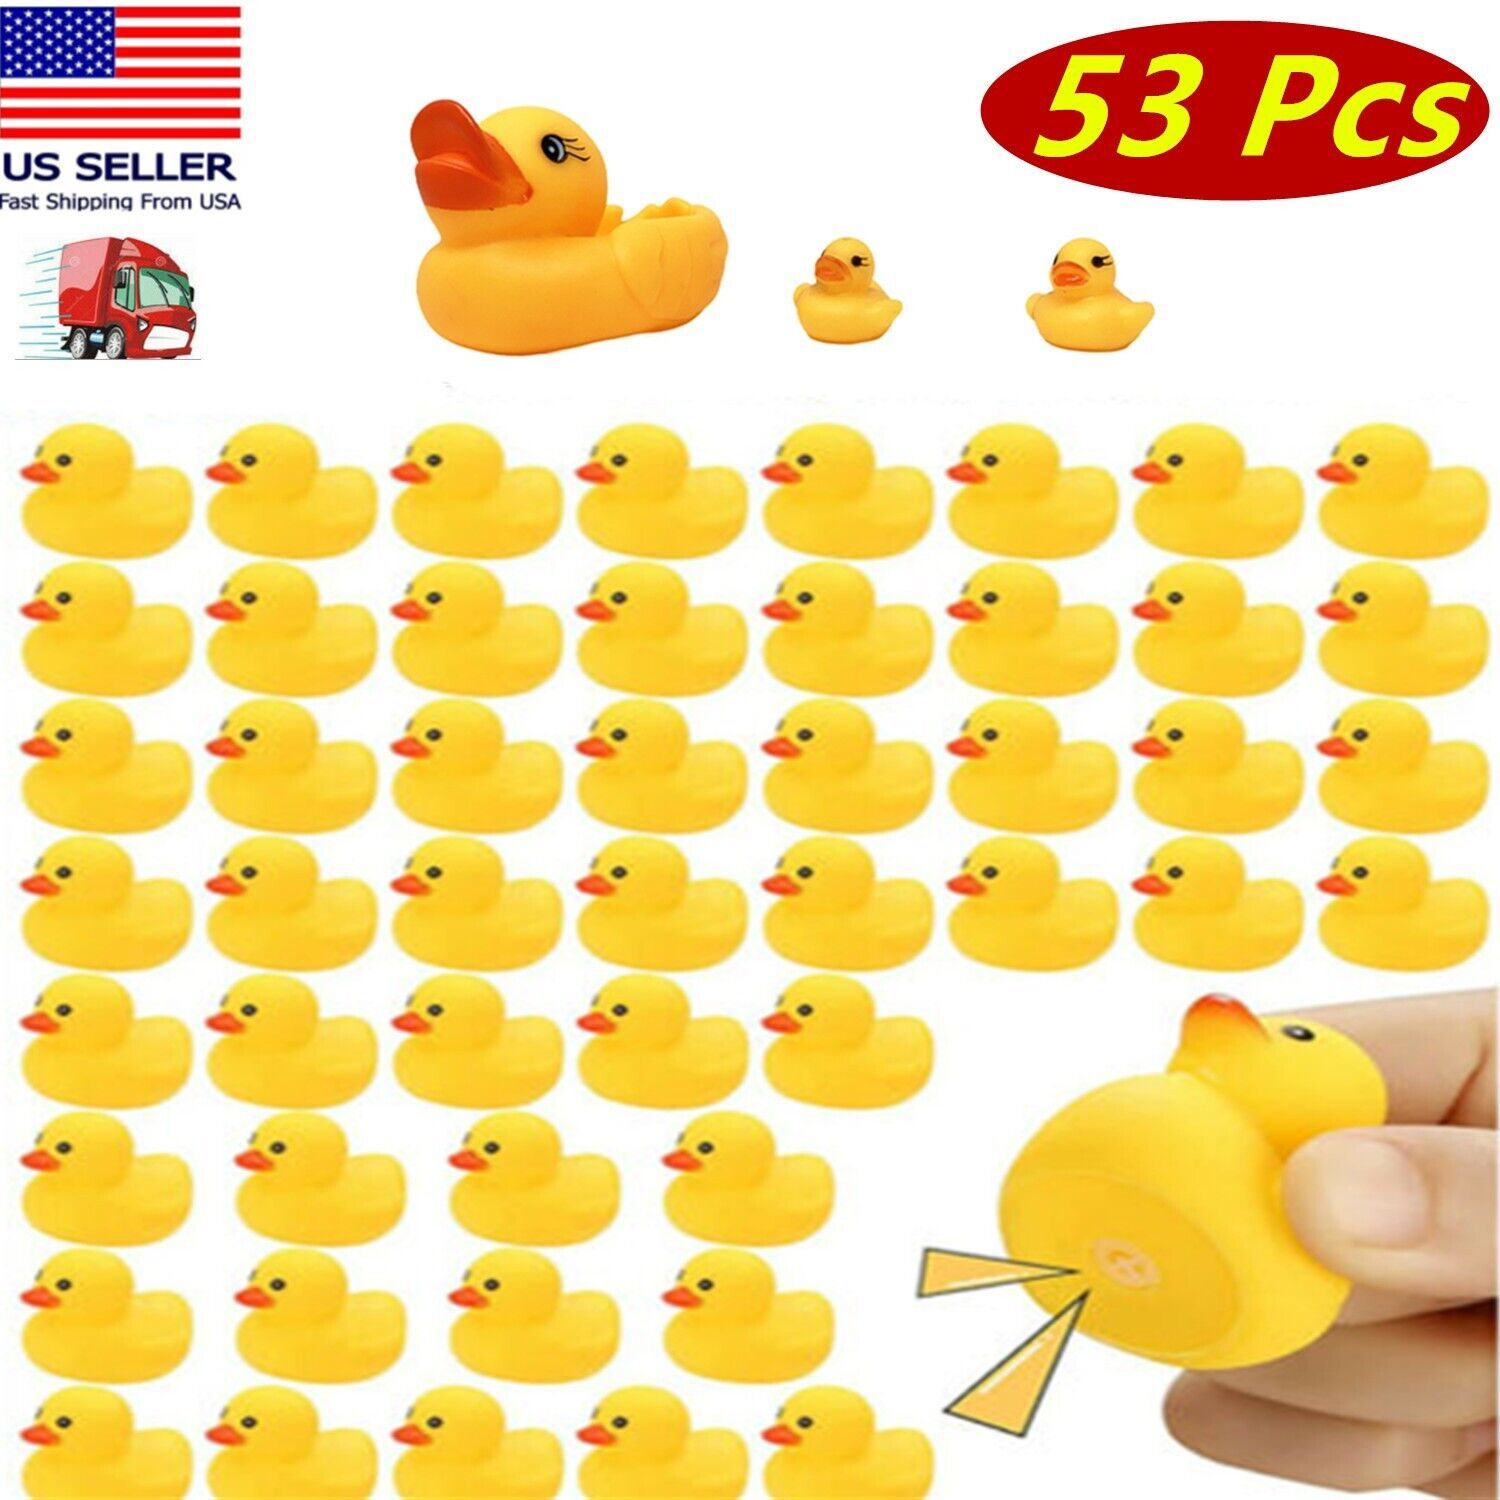 Primary image for 53 Pcs Of Rubber Ducky Float Duck Baby Bath Toy, Shower, Bath, Birthday Party